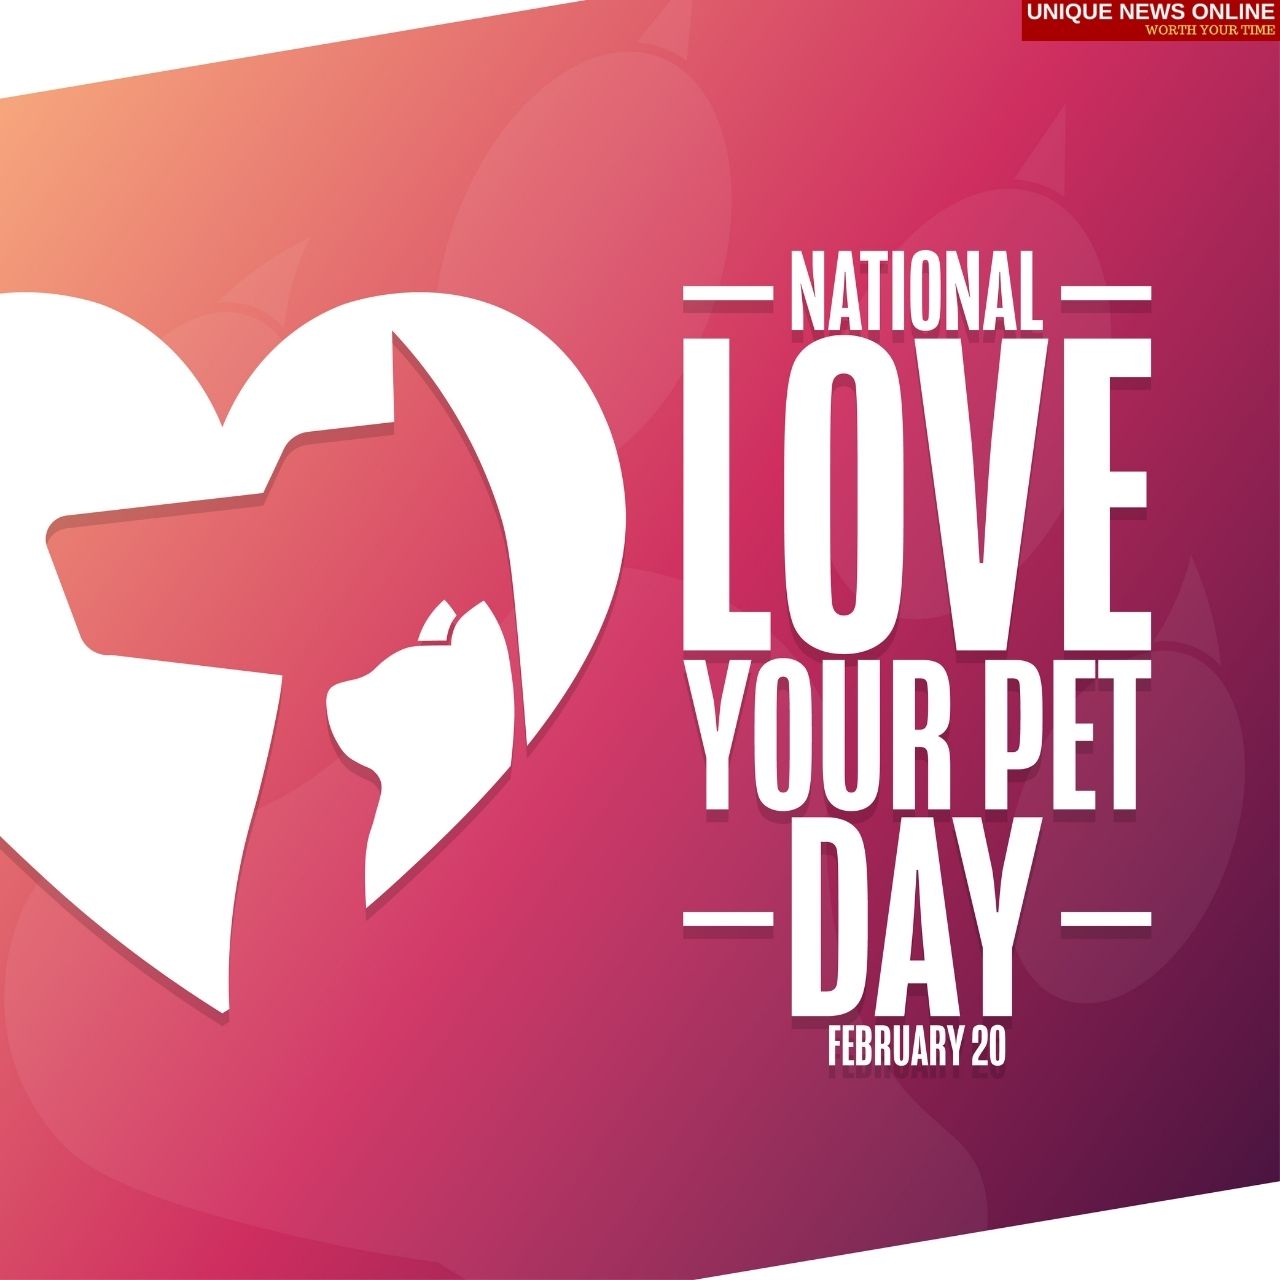 National Love Your Pet Day 2022 Instagram Captions، Quotes، HD Images، Wishes، Messages للمشاركة مع العشاق